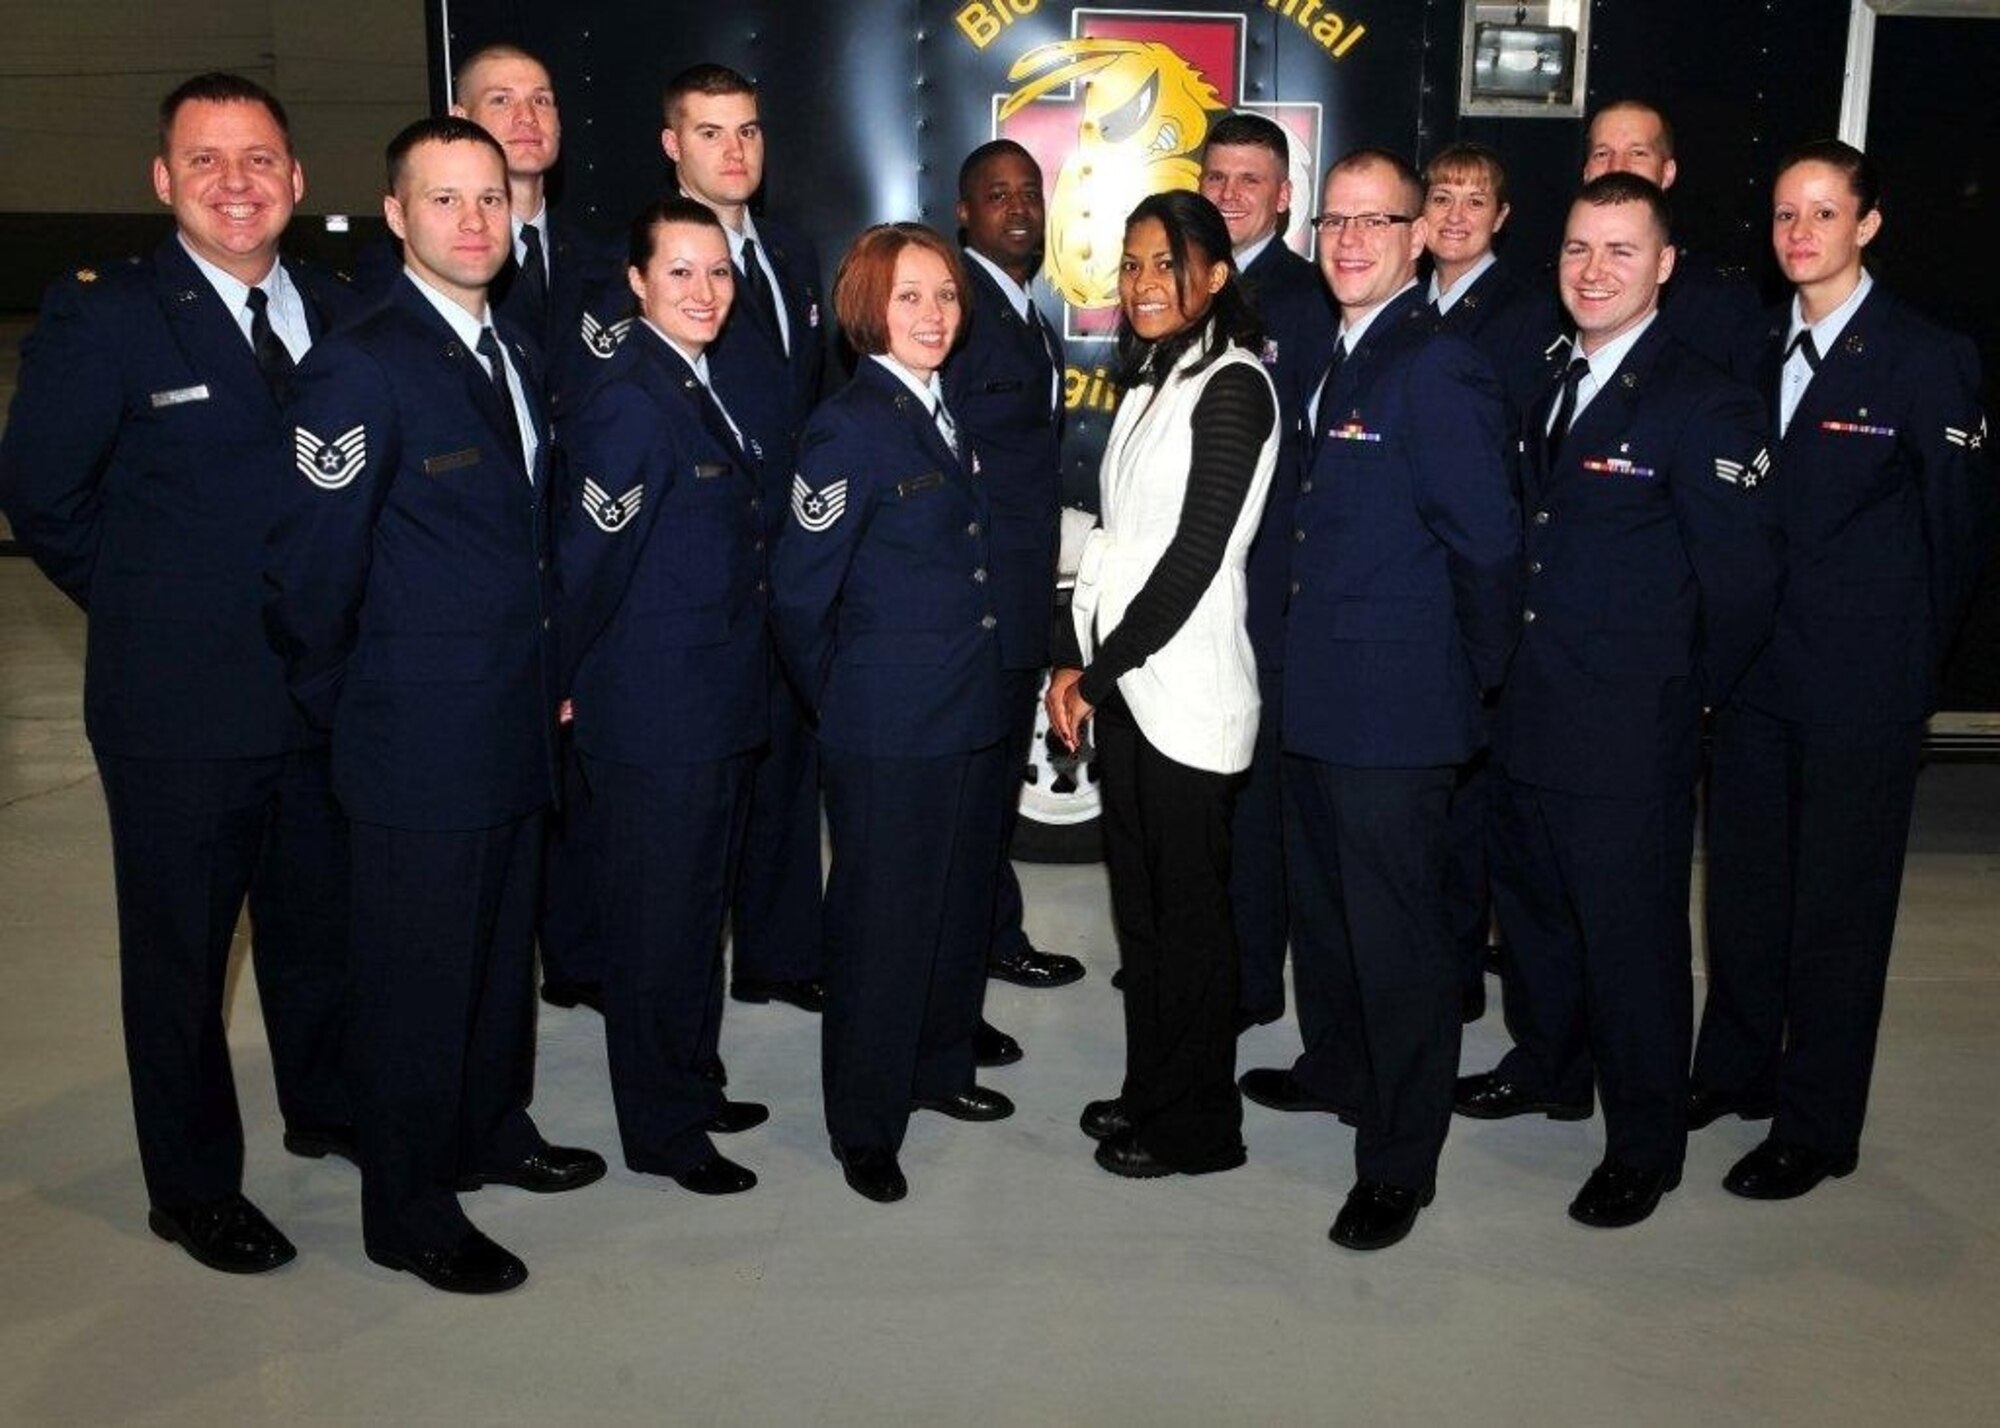 MINOT AIR FORCE BASE, N.D. -- Air Force Chief of Staff Gen. Norton Schwartz recently awarded a team of Minot AFB medics with the 2011 Air Force Team Excellence Award, as well as the Air Force Best Practice Award. The team of medics was presented the award for their ingenuity in creating a high-tech reporting system which allowed the Air Force to better define health risks and personnel exposures for both deployed and in-garrison forces. (U.S. Air Force Photo/Senior Airman Michael J. Veloz)